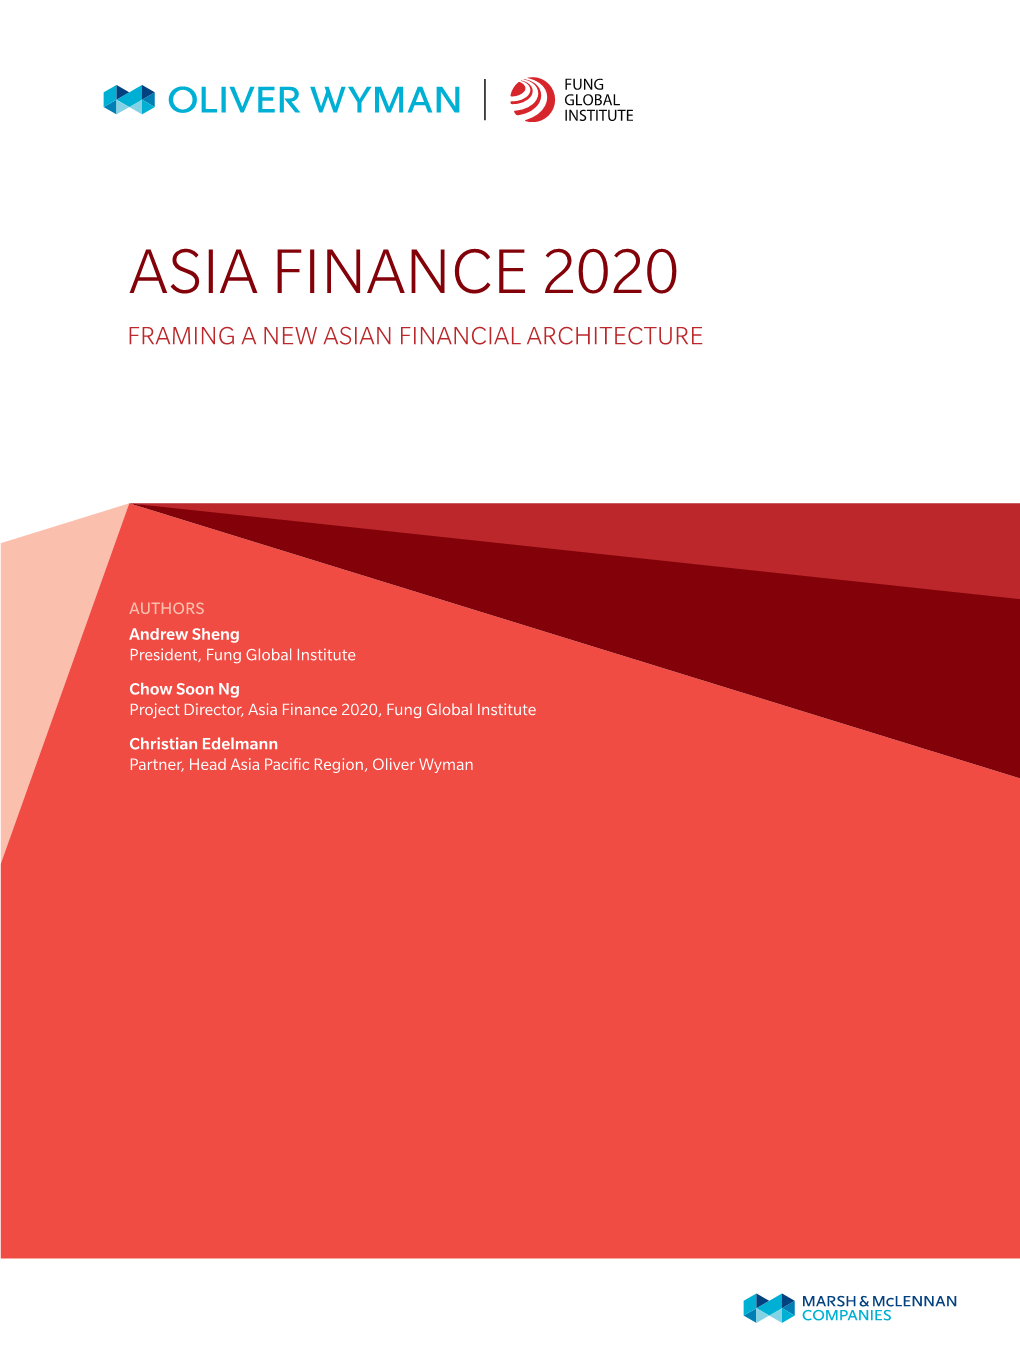 Asia Finance 2020 Framing a New Asian Financial Architecture